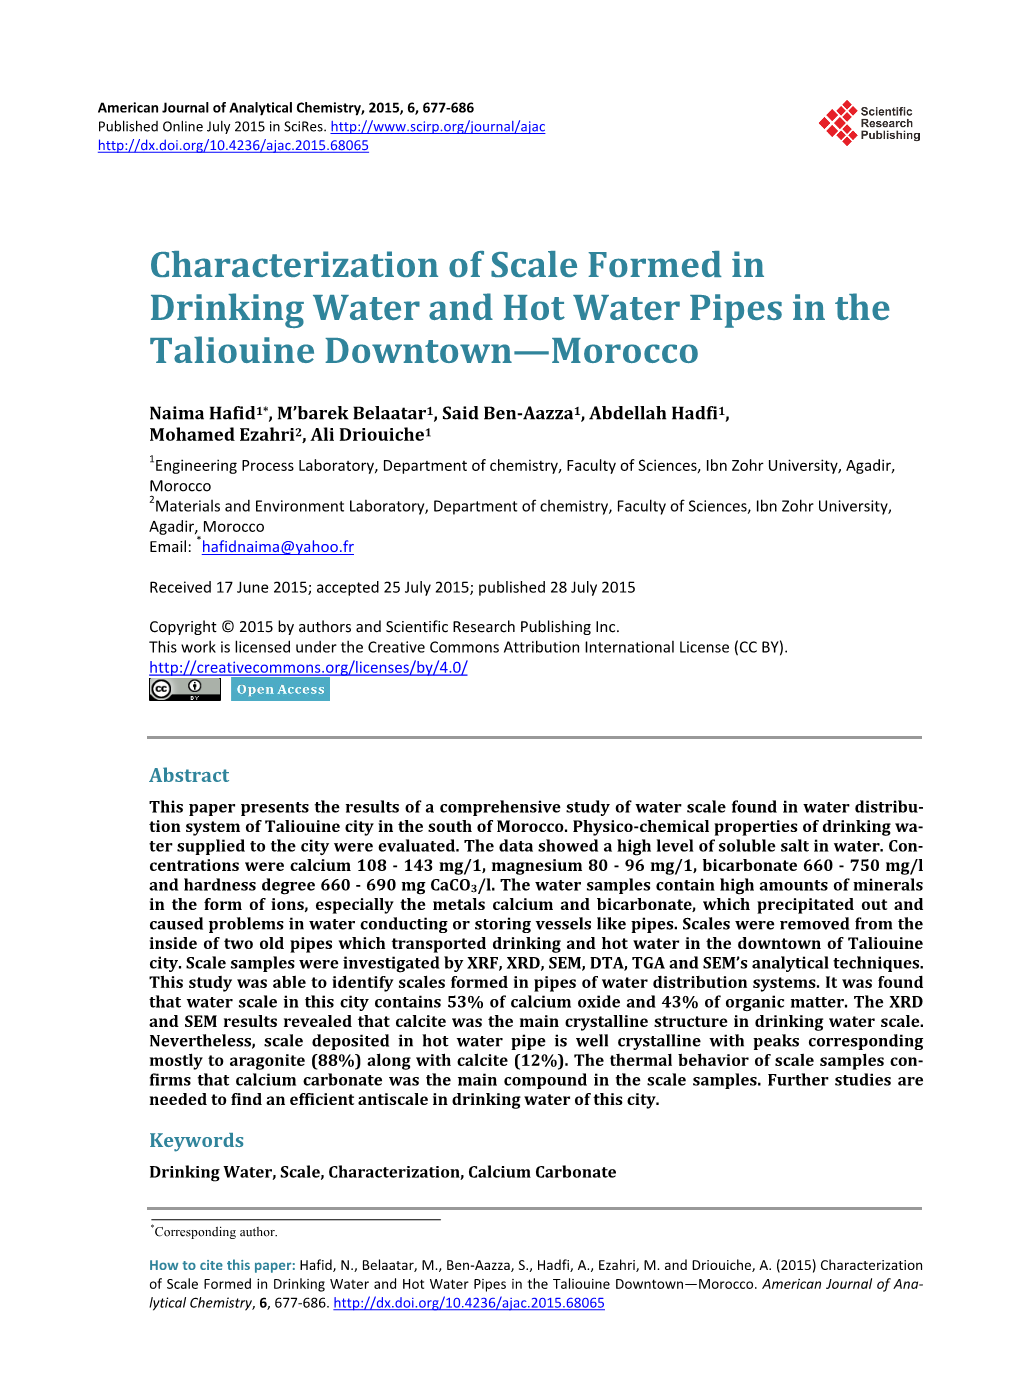 Characterization of Scale Formed in Drinking Water and Hot Water Pipes in the Taliouine Downtown—Morocco